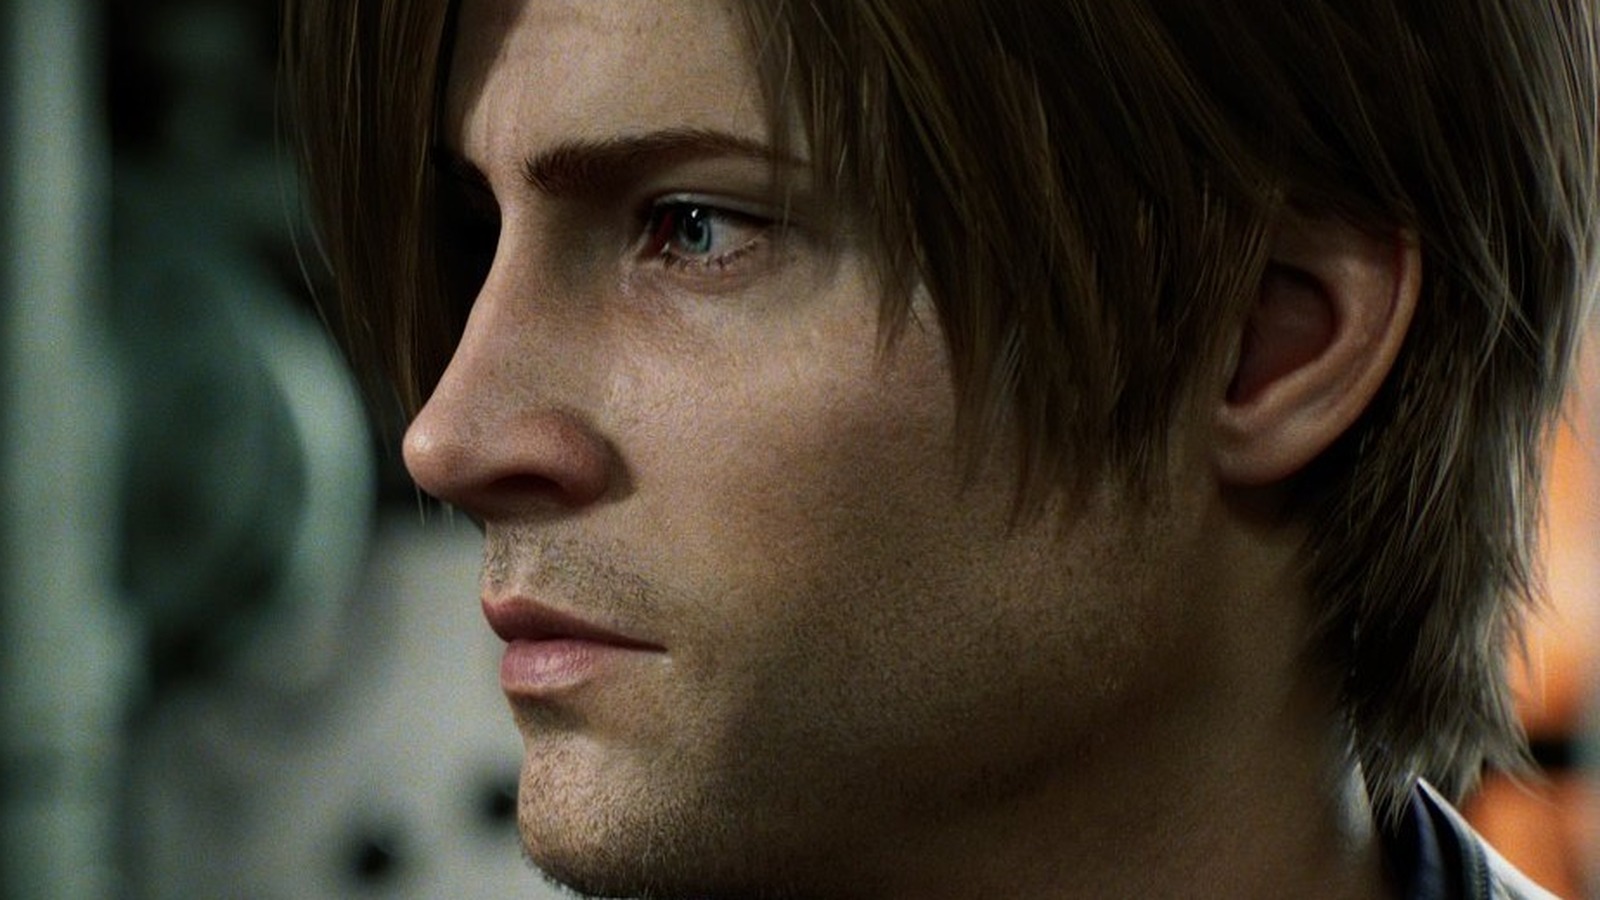 Leon Kennedy and Claire Redfield's voice actors have been replaced for the Resident  Evil 2 remake